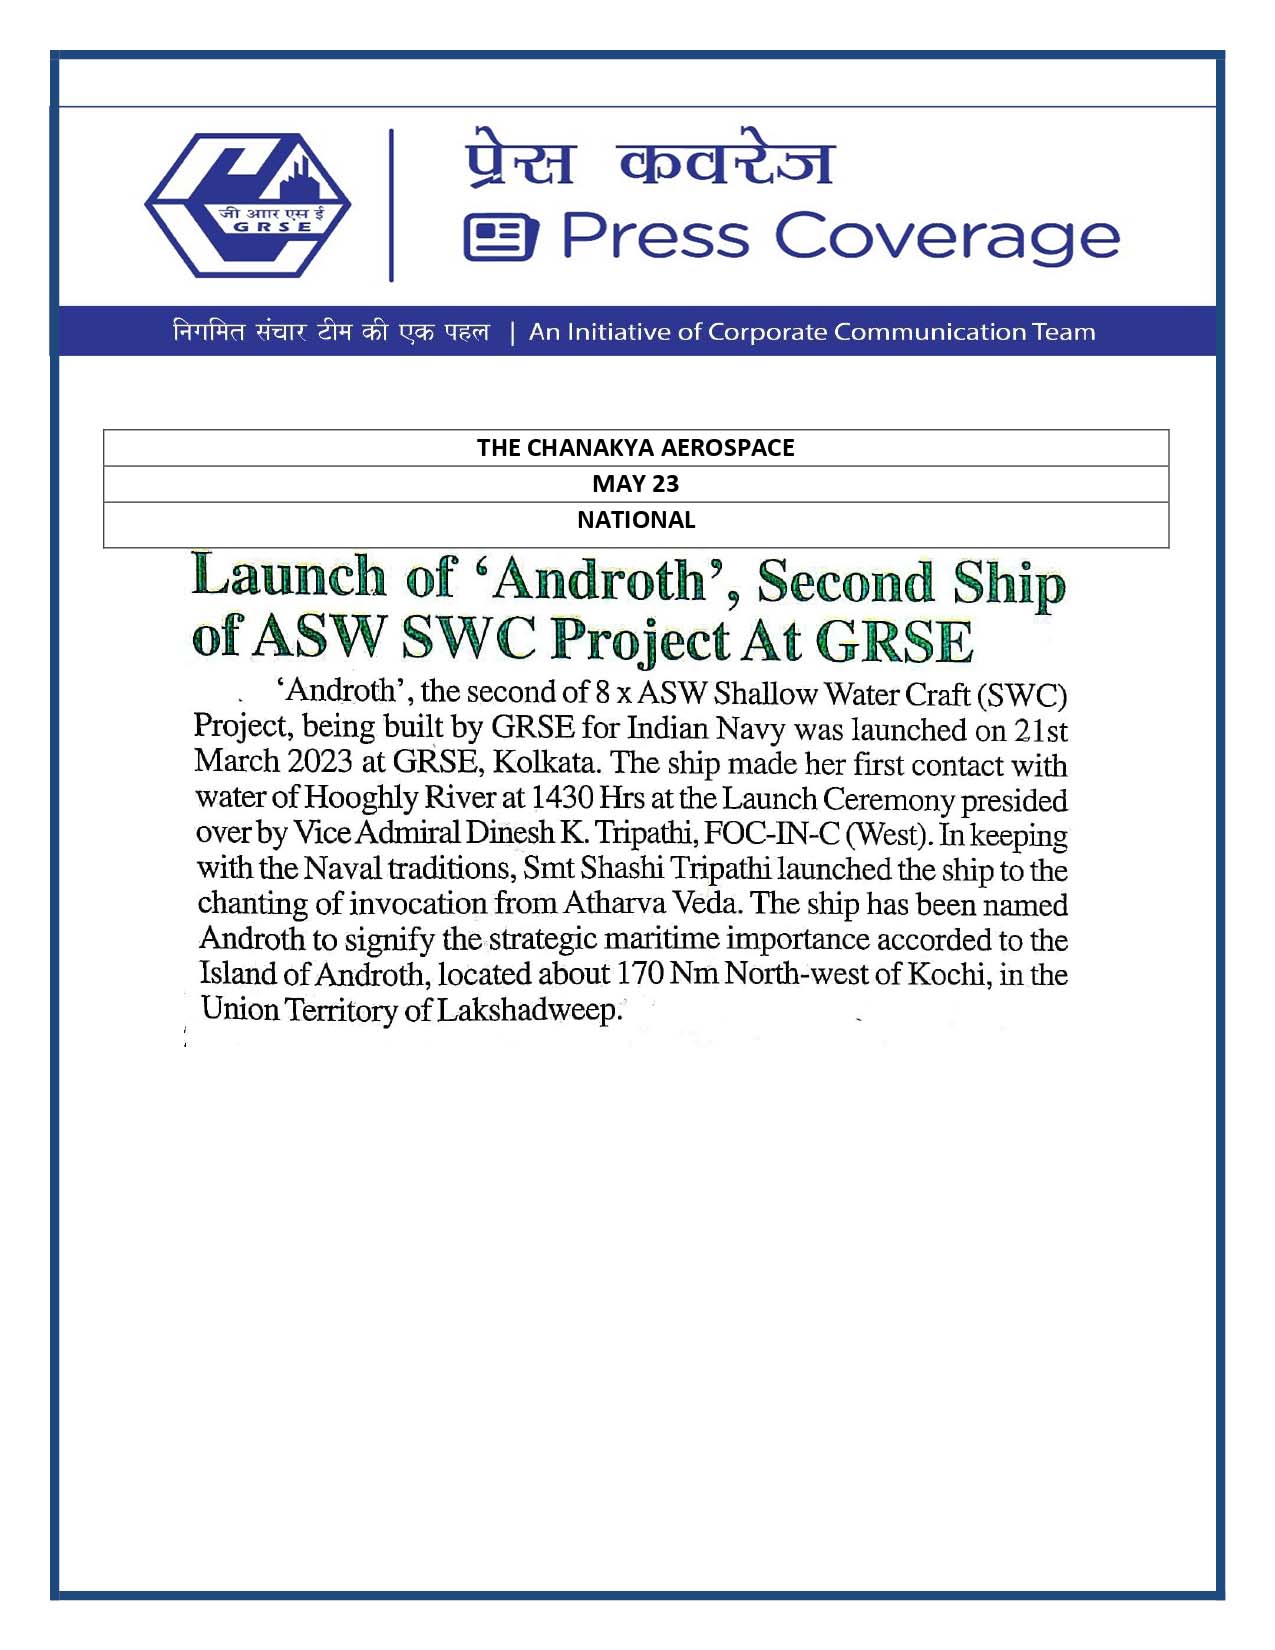 Launch of 'Androth', Second Ship of ASW SWC project at GRSE